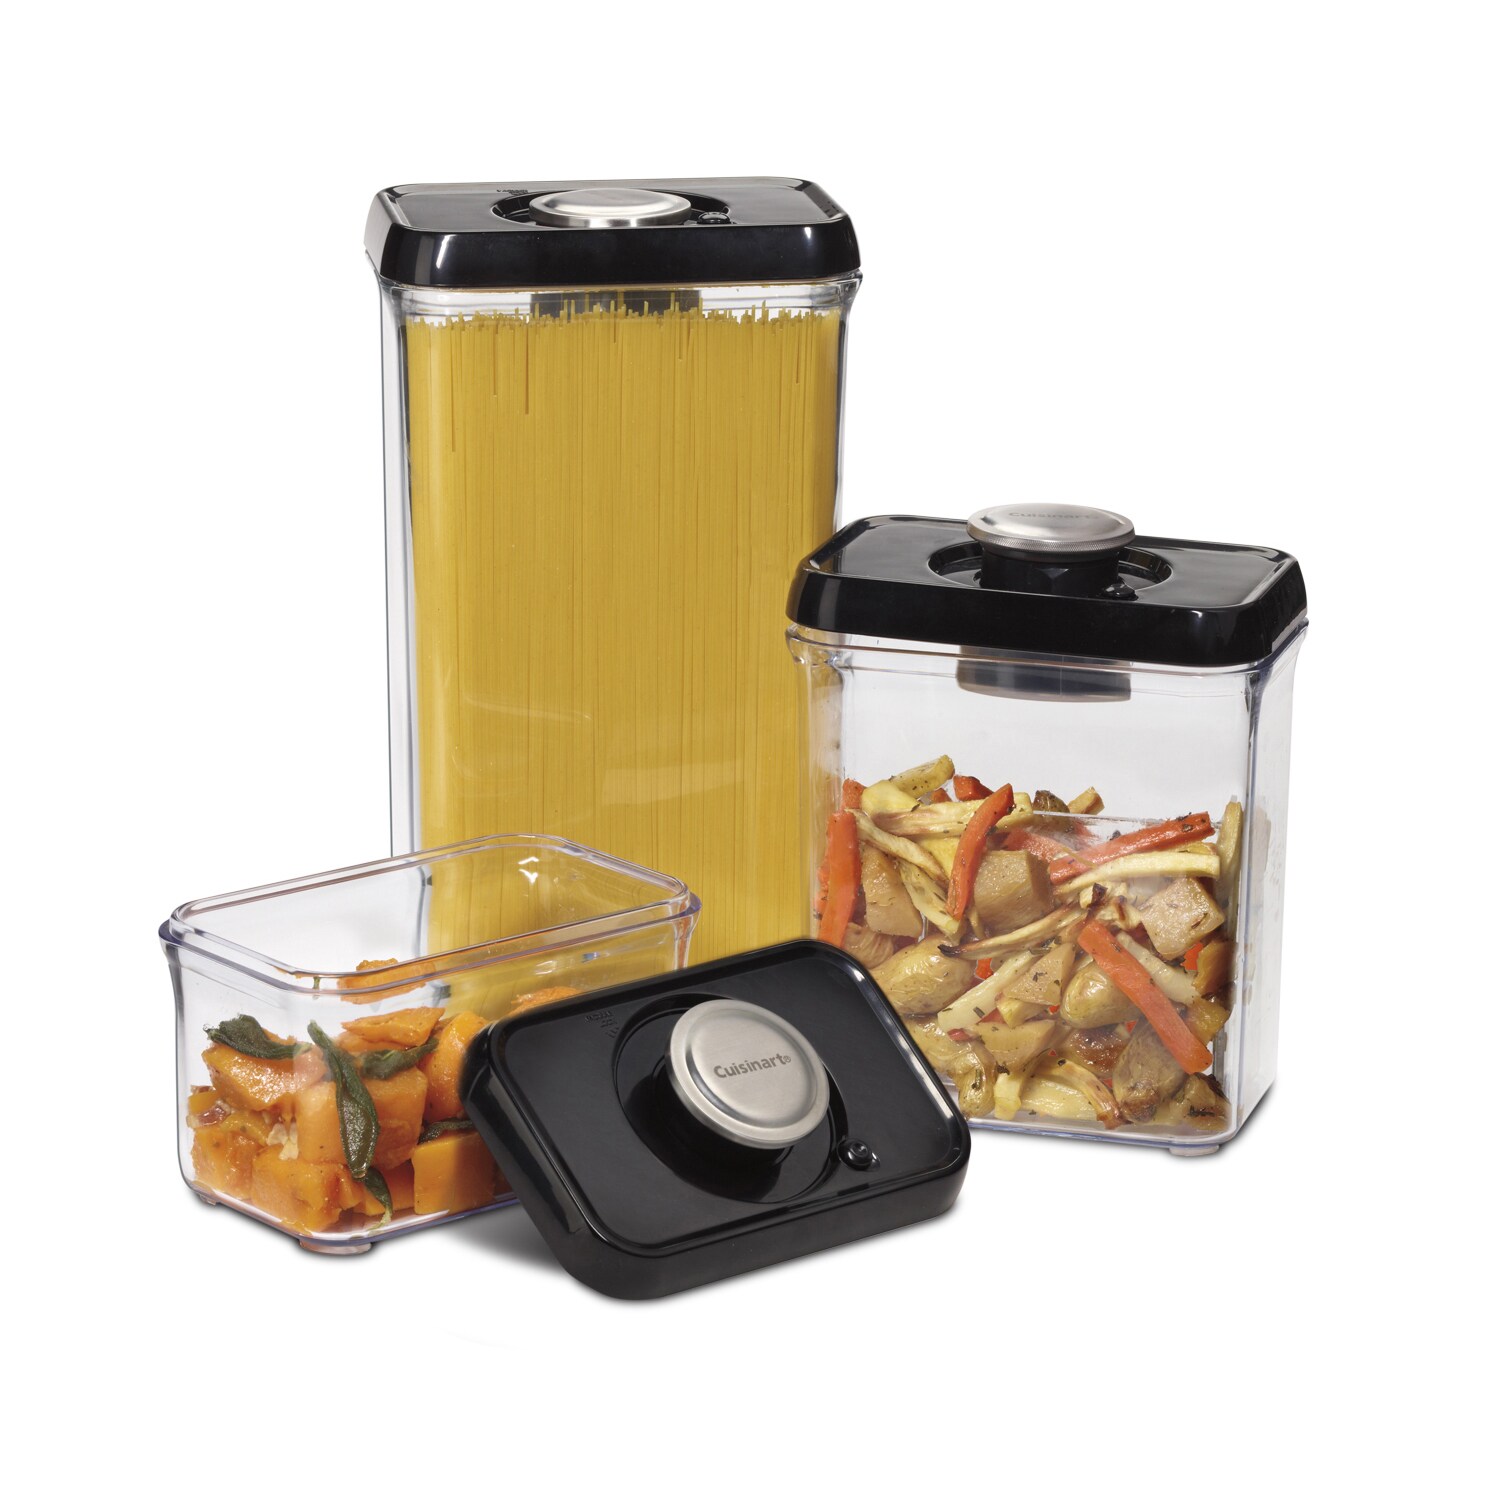 https://ak1.ostkcdn.com/images/products/7988328/Fresh-Edge-6-Piece-Vacuum-Sealed-Food-Storage-Containers-430d1135-74ee-436f-90d5-c86d69232ed6.jpg